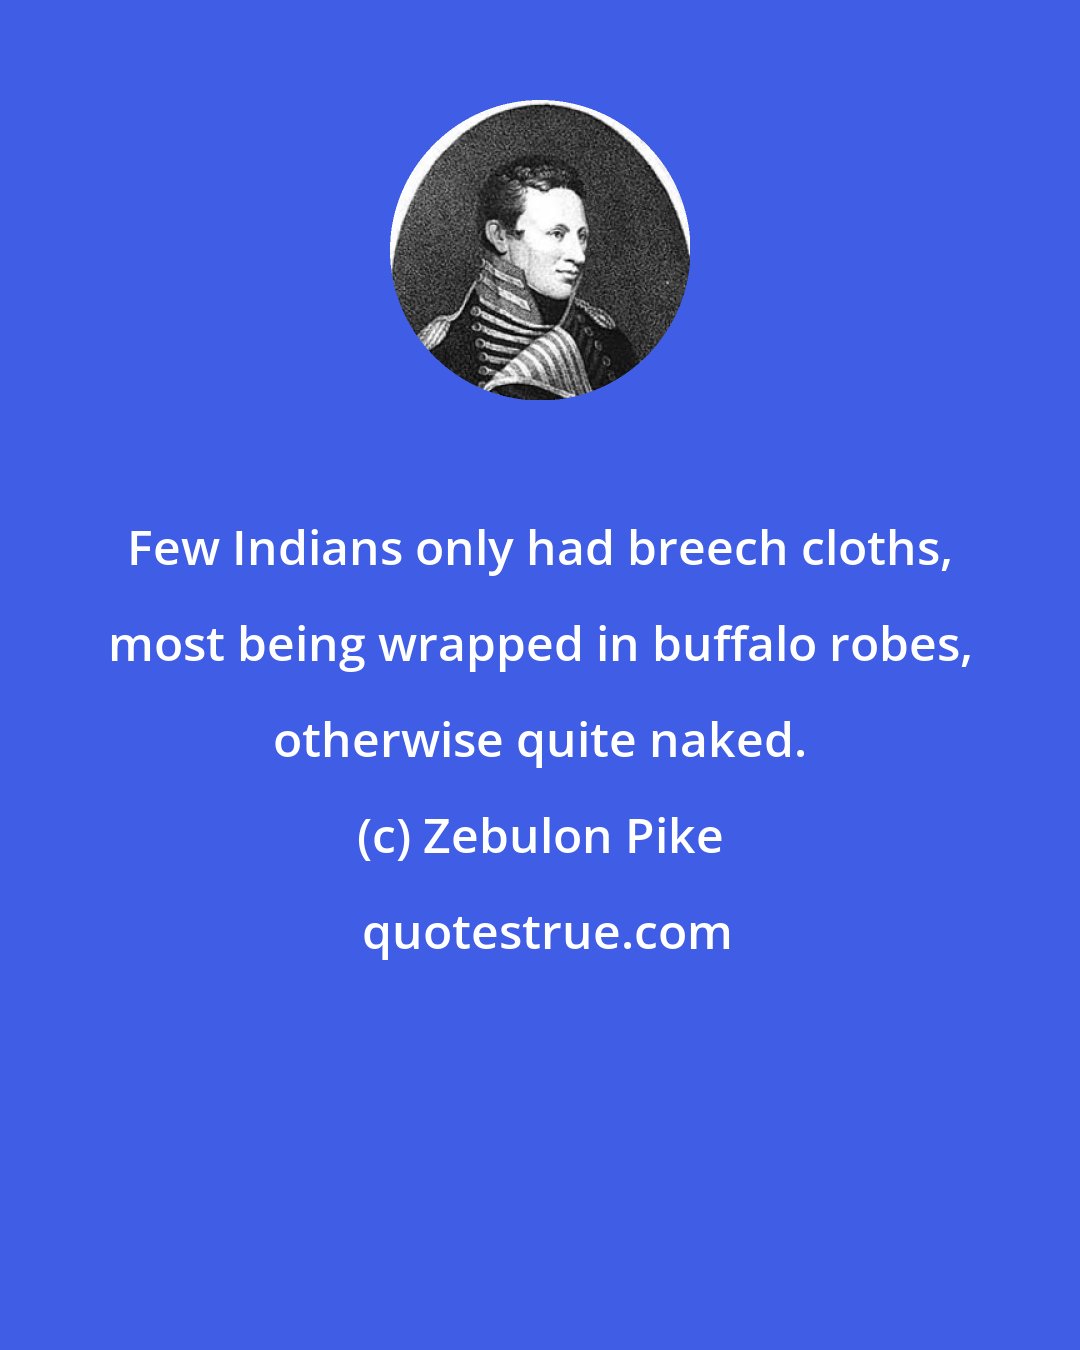 Zebulon Pike: Few Indians only had breech cloths, most being wrapped in buffalo robes, otherwise quite naked.